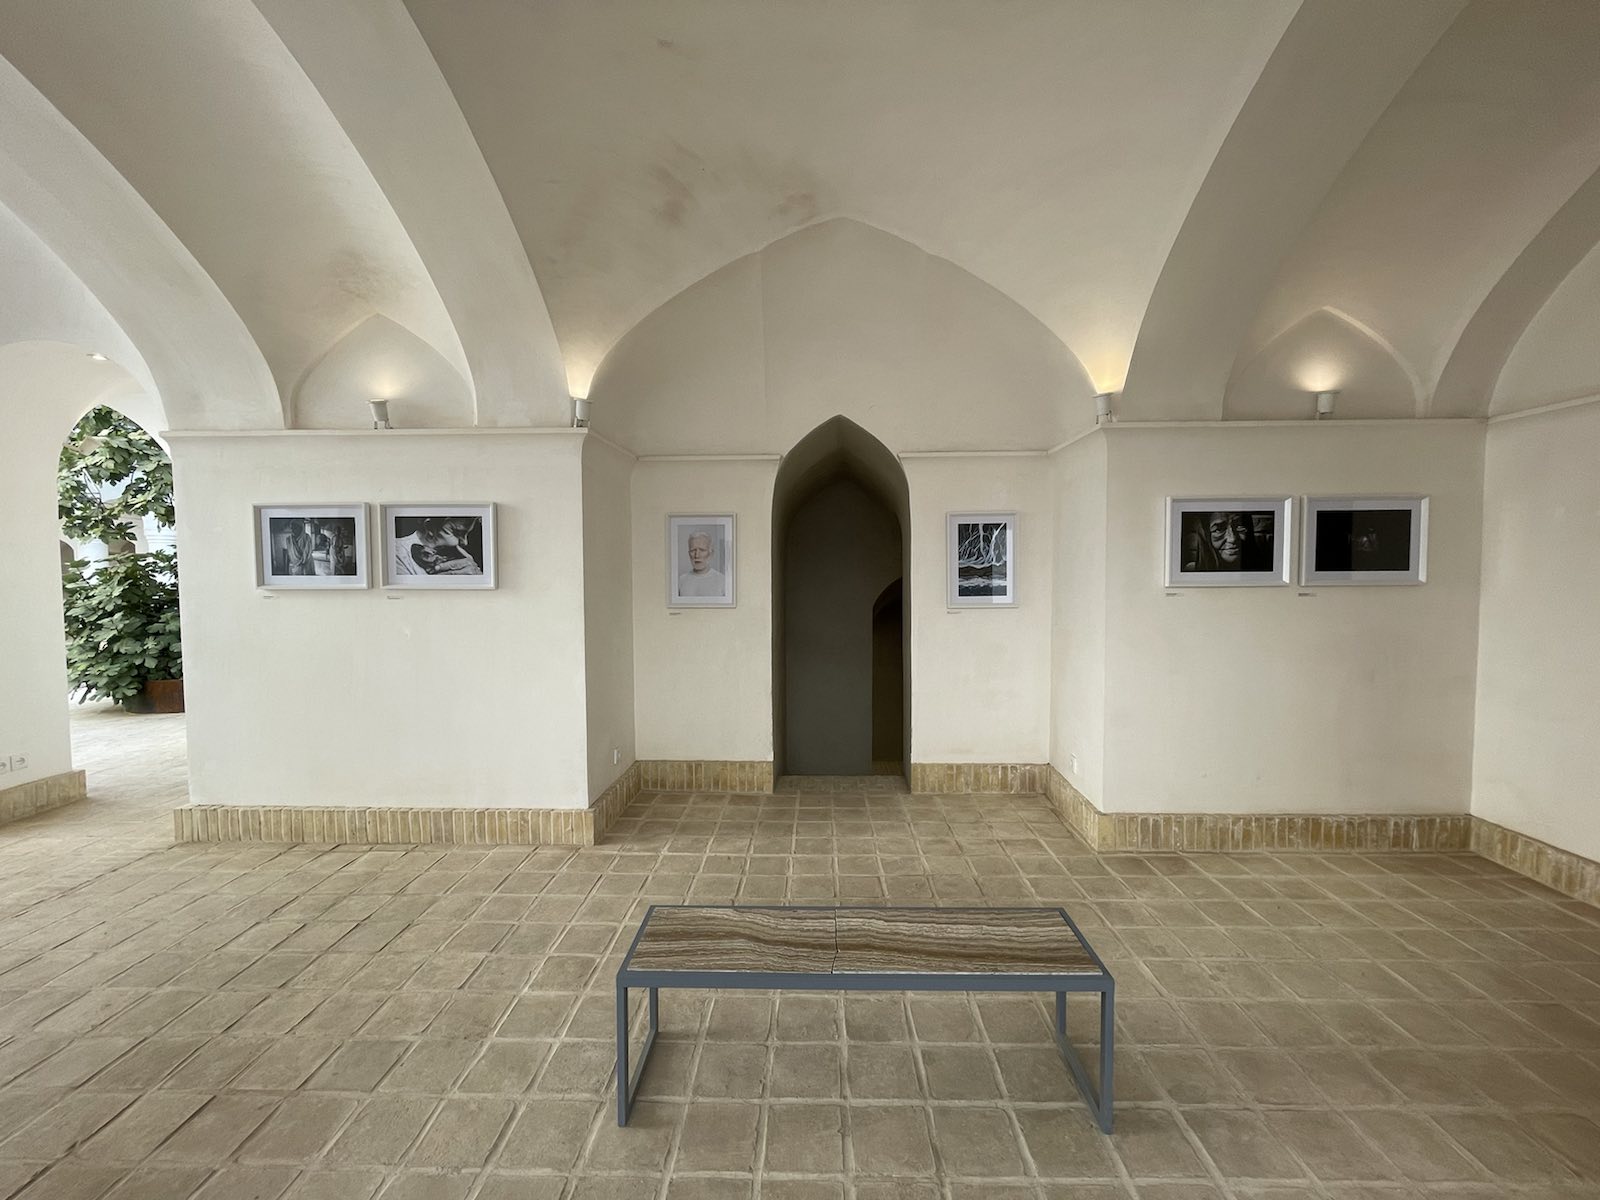 TIFA Winners Exhibition in House of Lucie Kashan